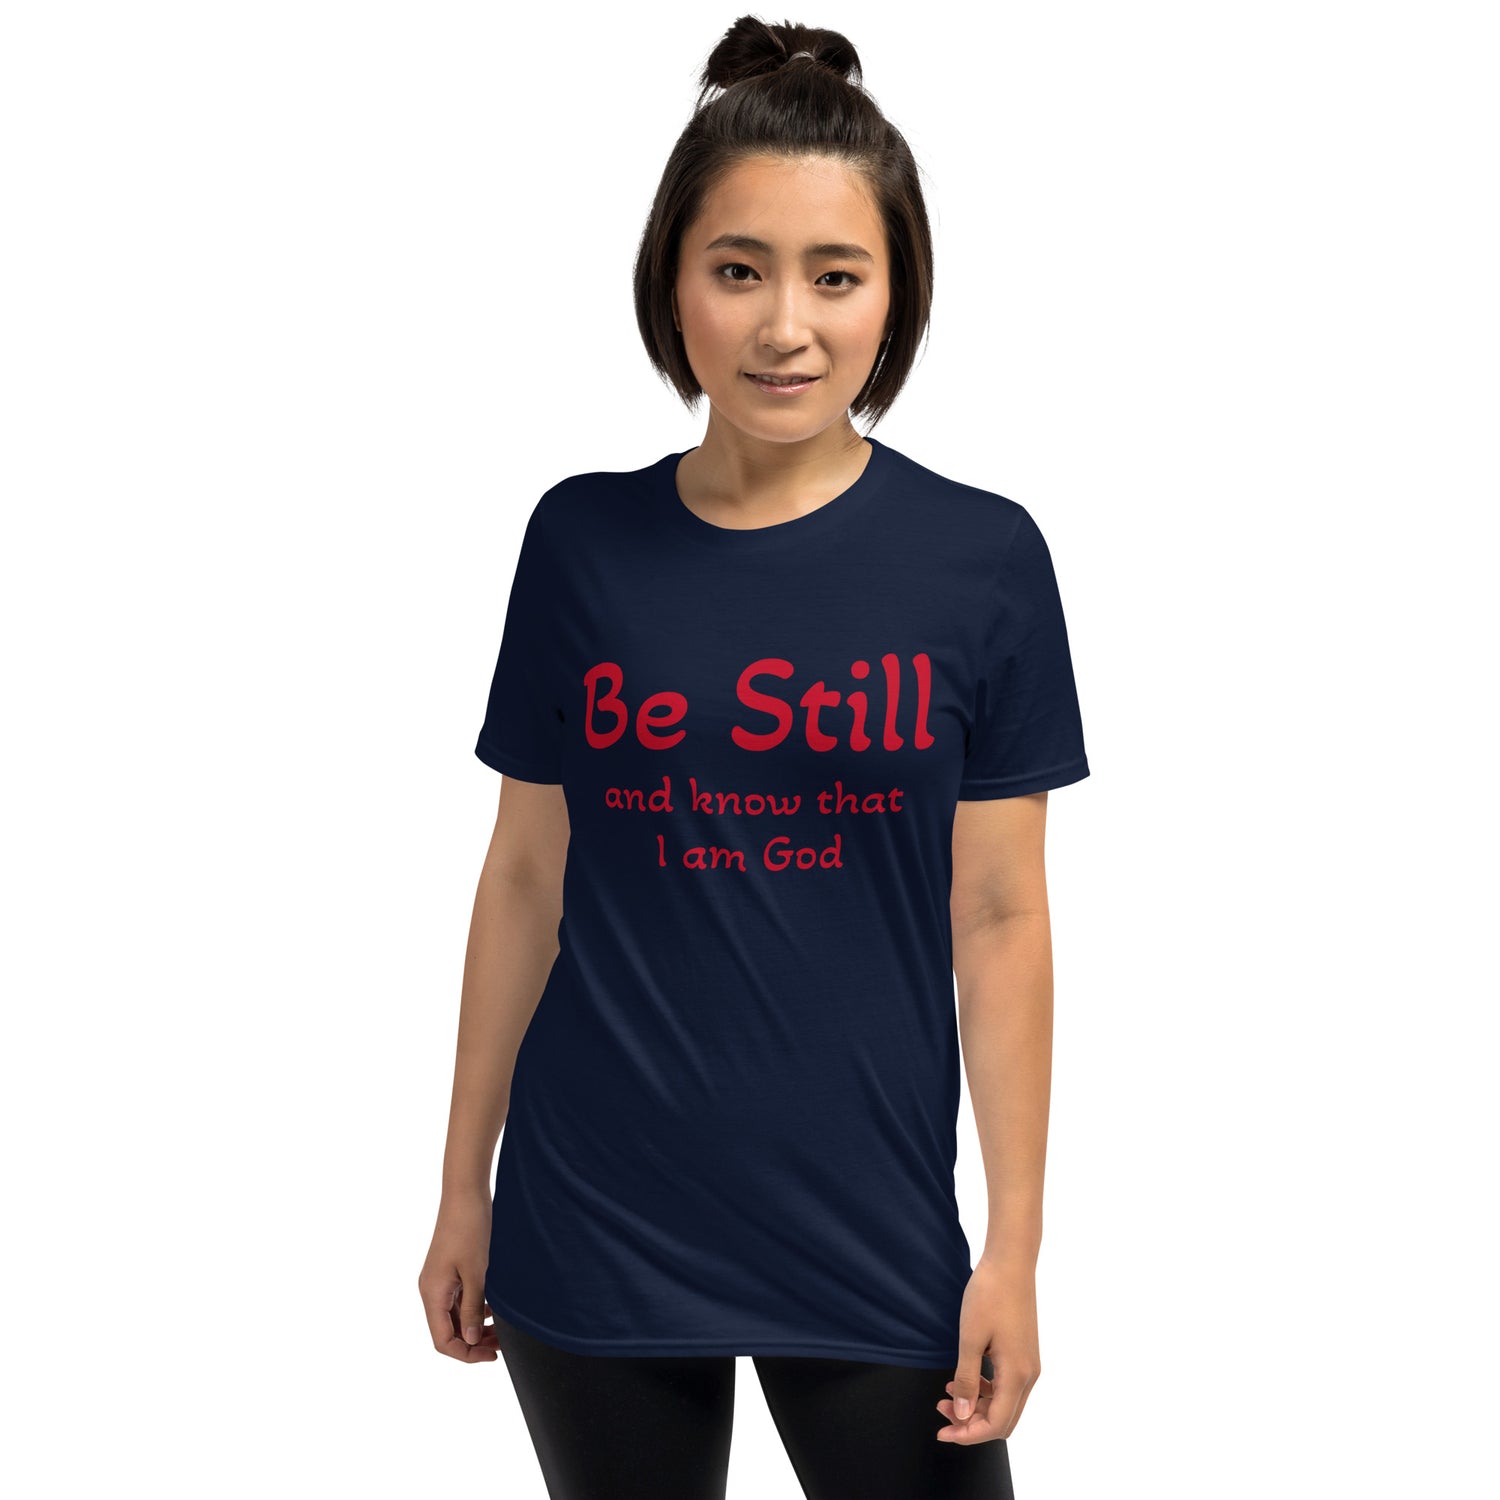 Unisex soft-style Navy with Be Still and Know That I am God in Red letters